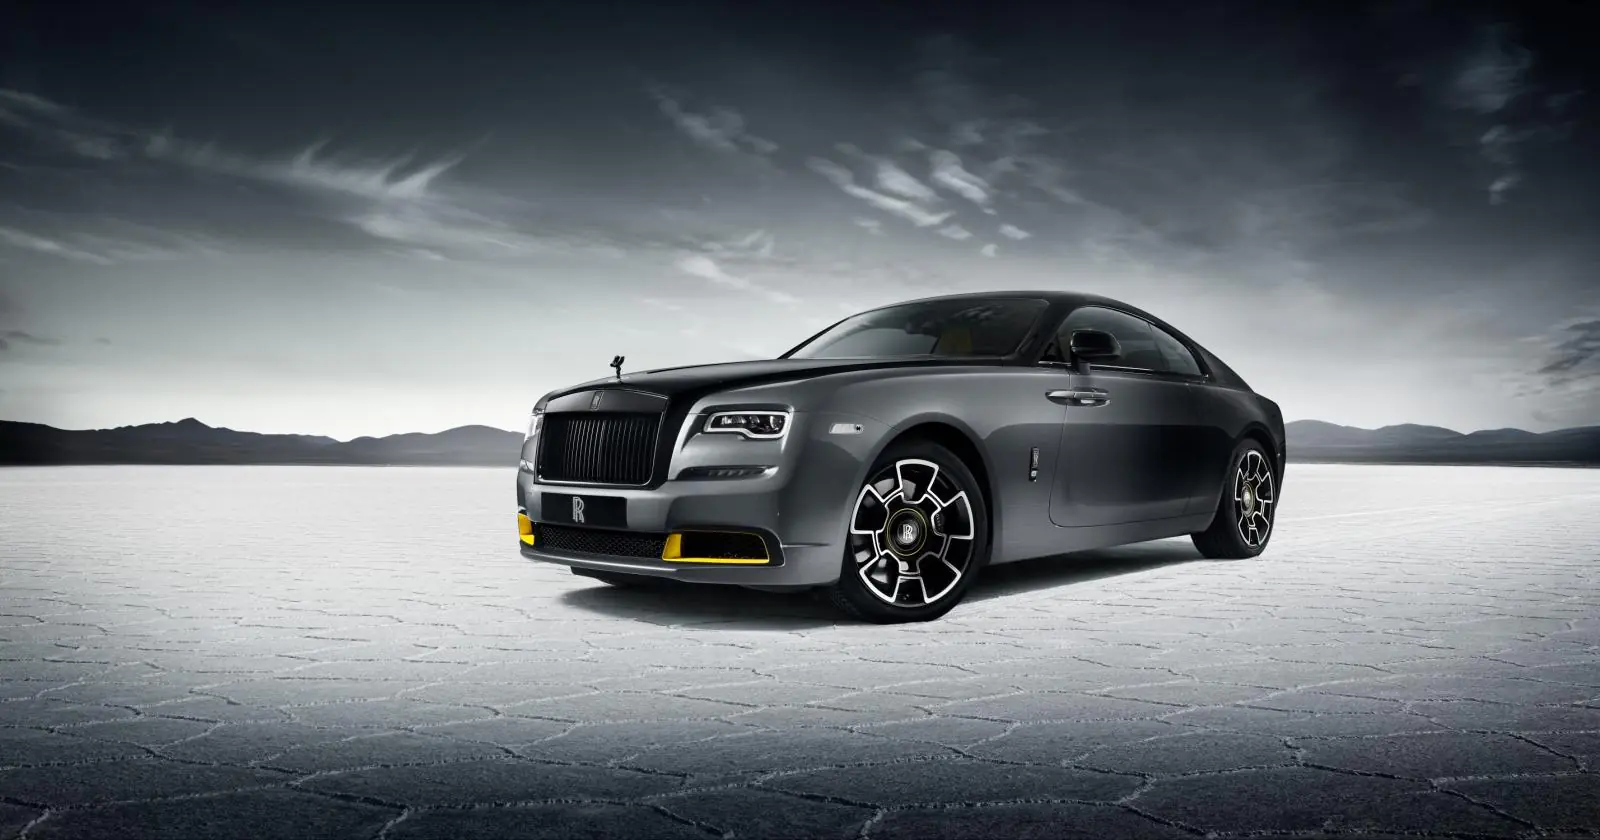 Buy this car and get a free Rolls-Royce Wraith! Know dealership's crazy deals